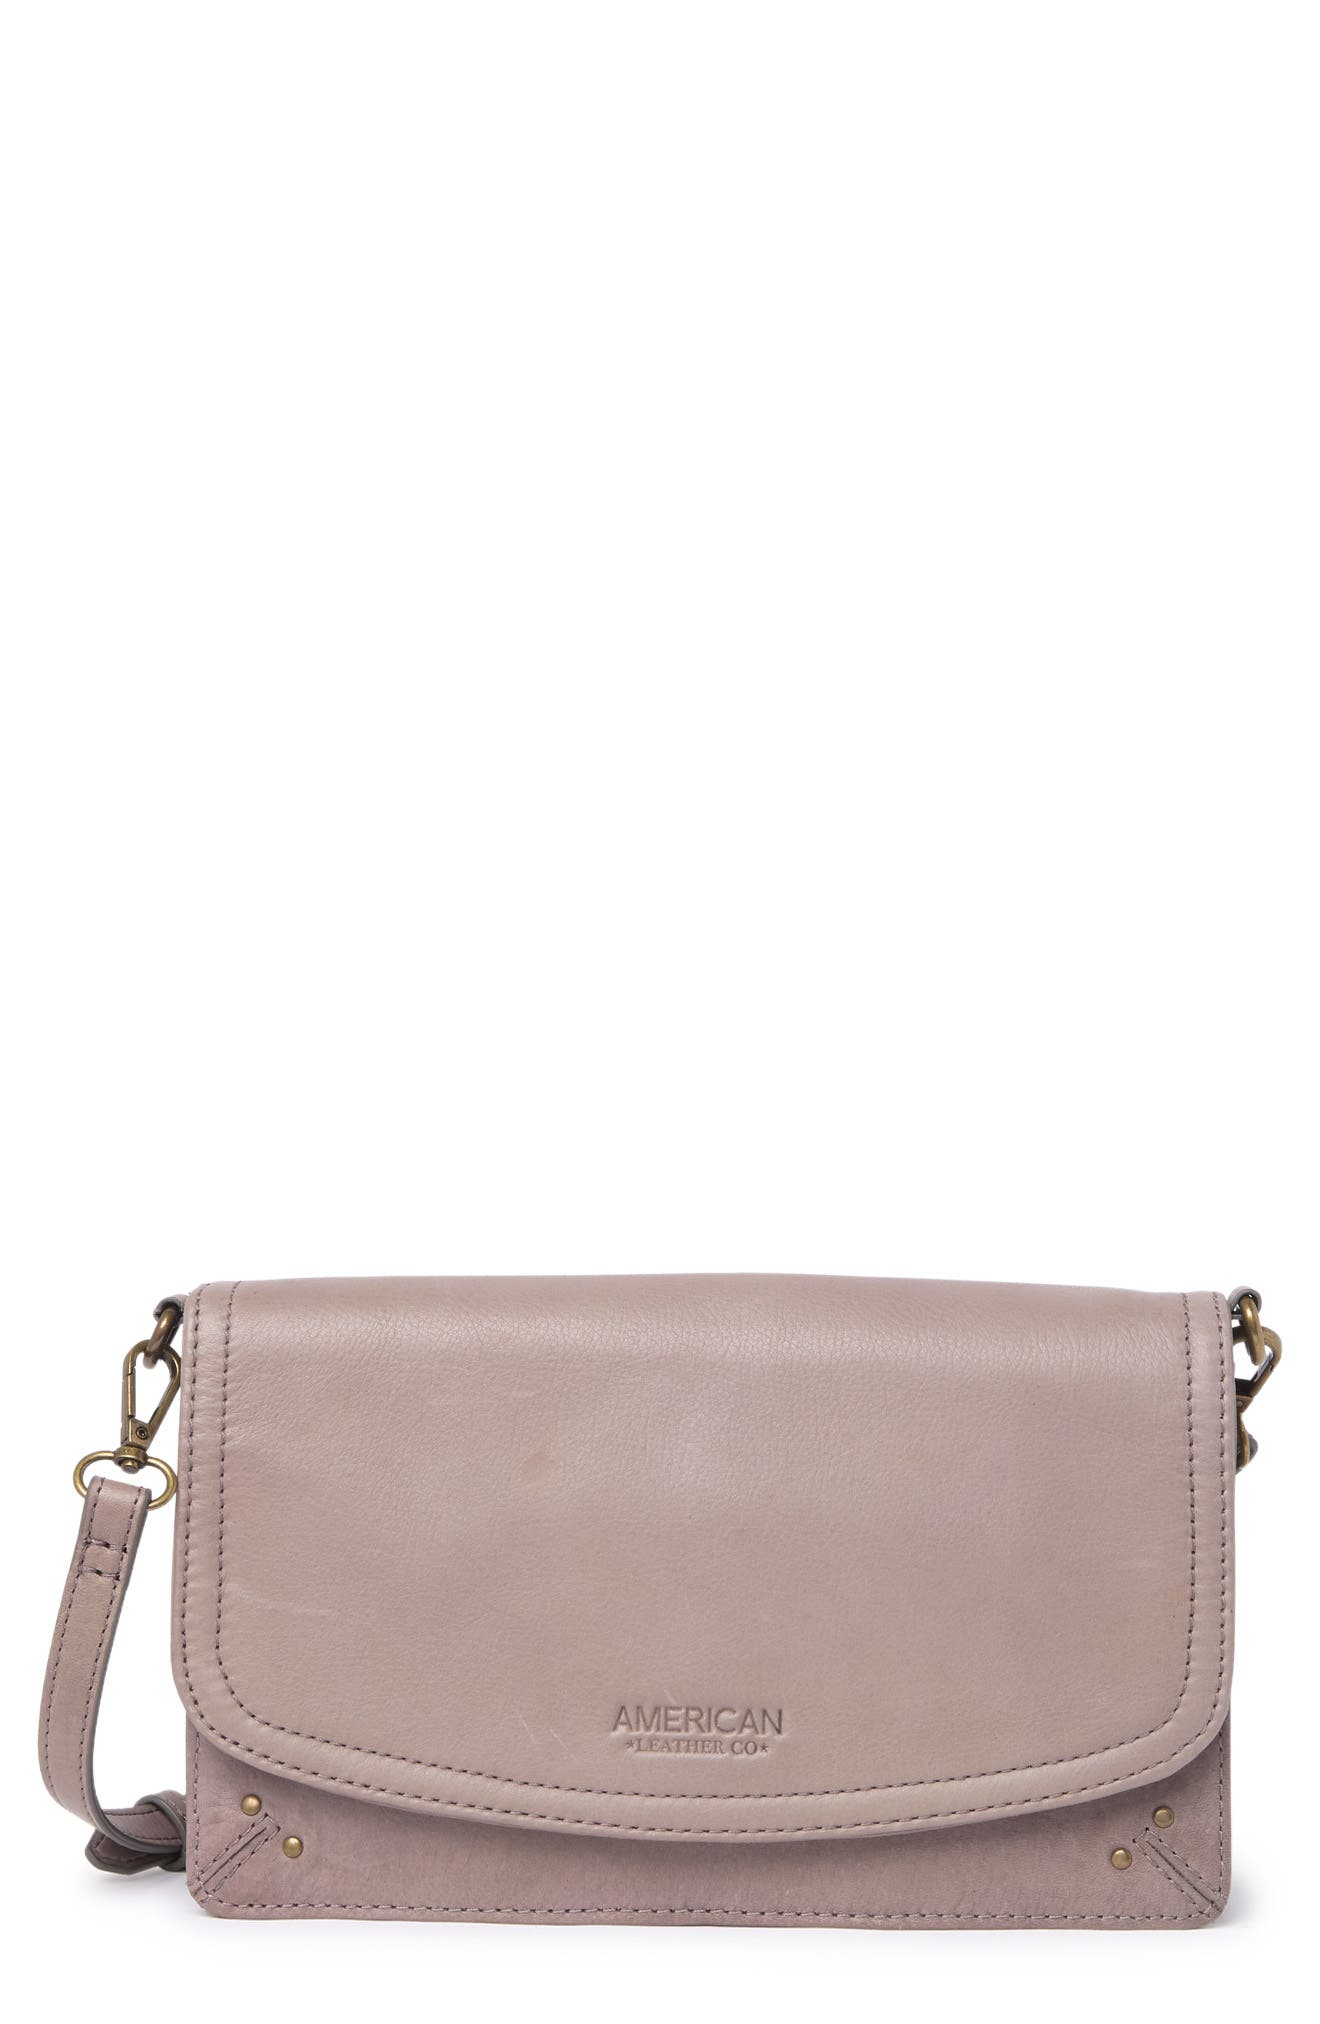 American Leather Co. Brenton Leather Crossbody Bag In Ash Grey Smooth